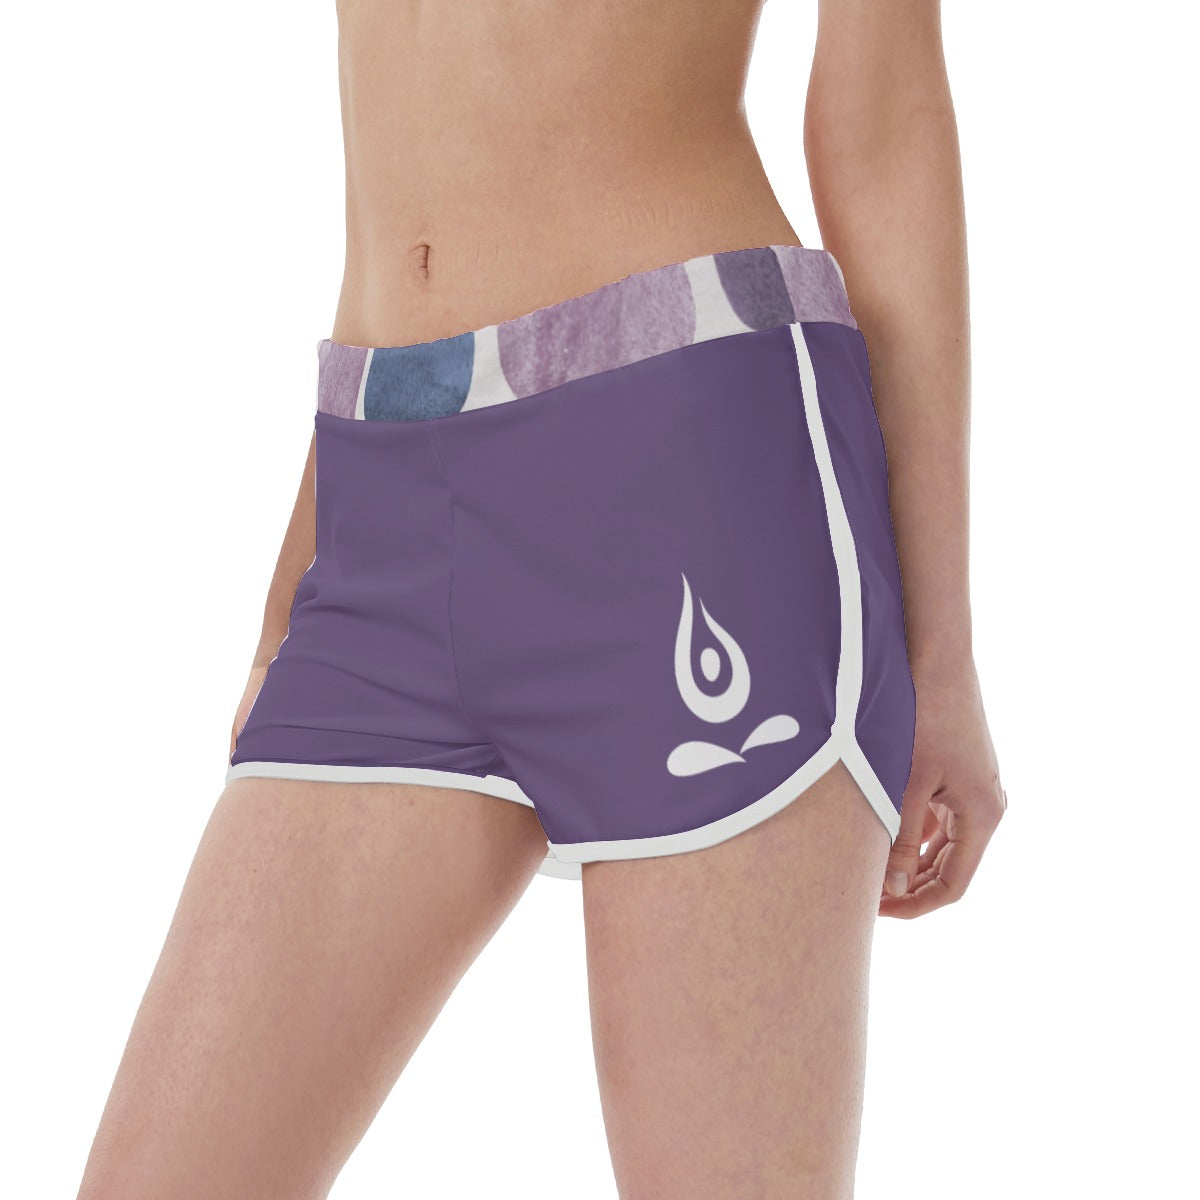 Teen Yoga Shorts - Track and Field Shorts Style - Personal Hour for Yoga and Meditations 